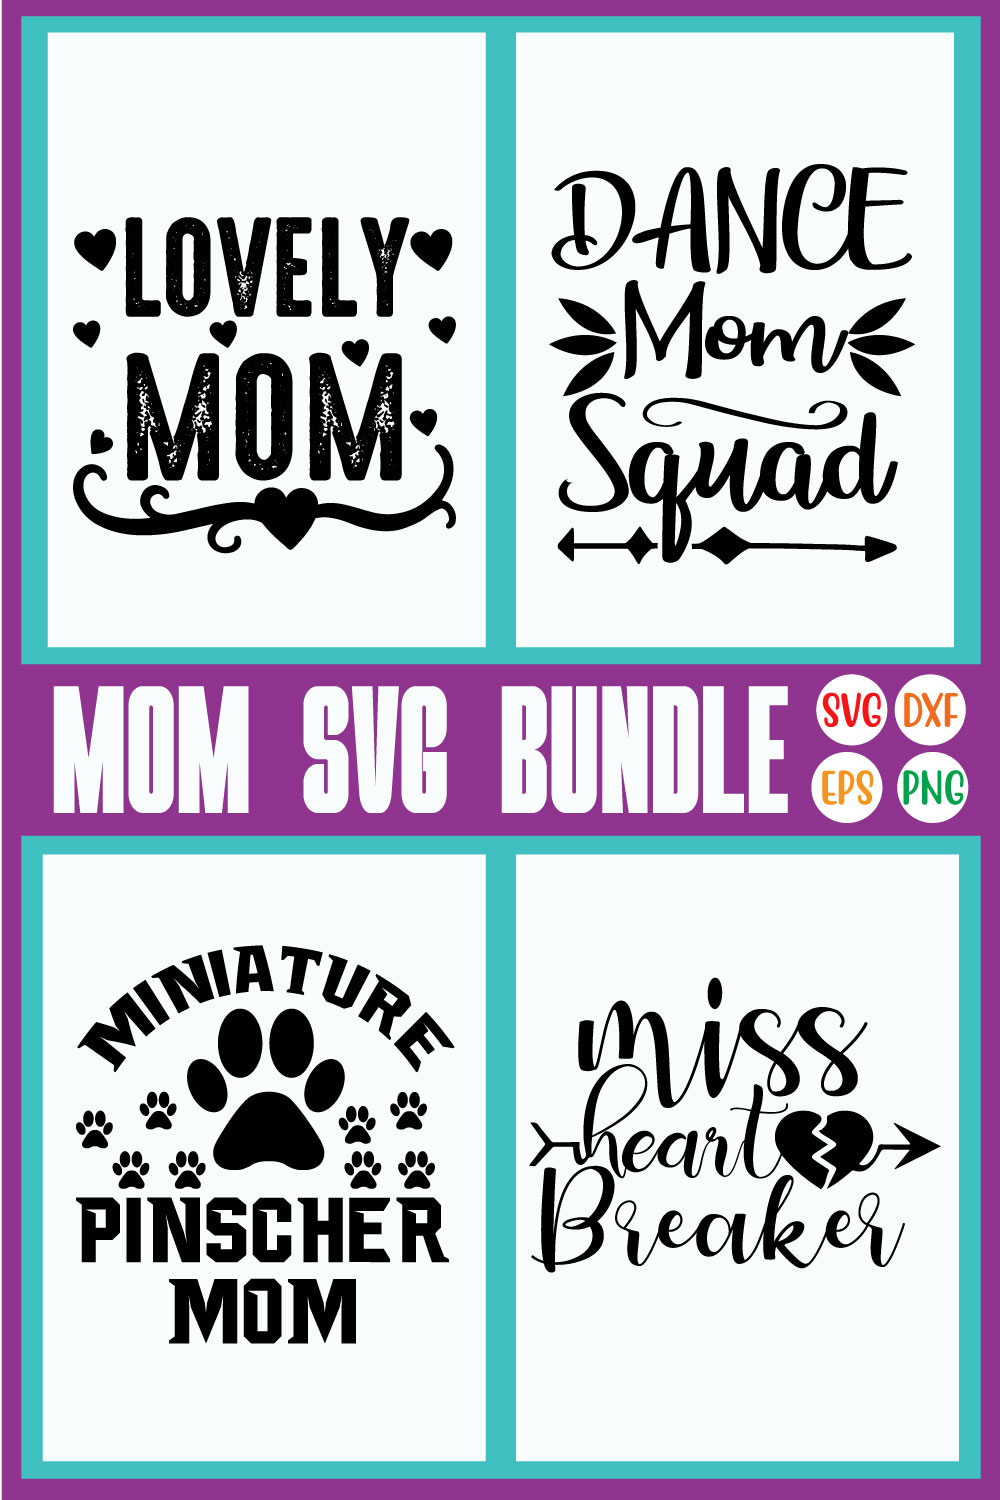 Mom Typography Designs Vol33 pinterest preview image.